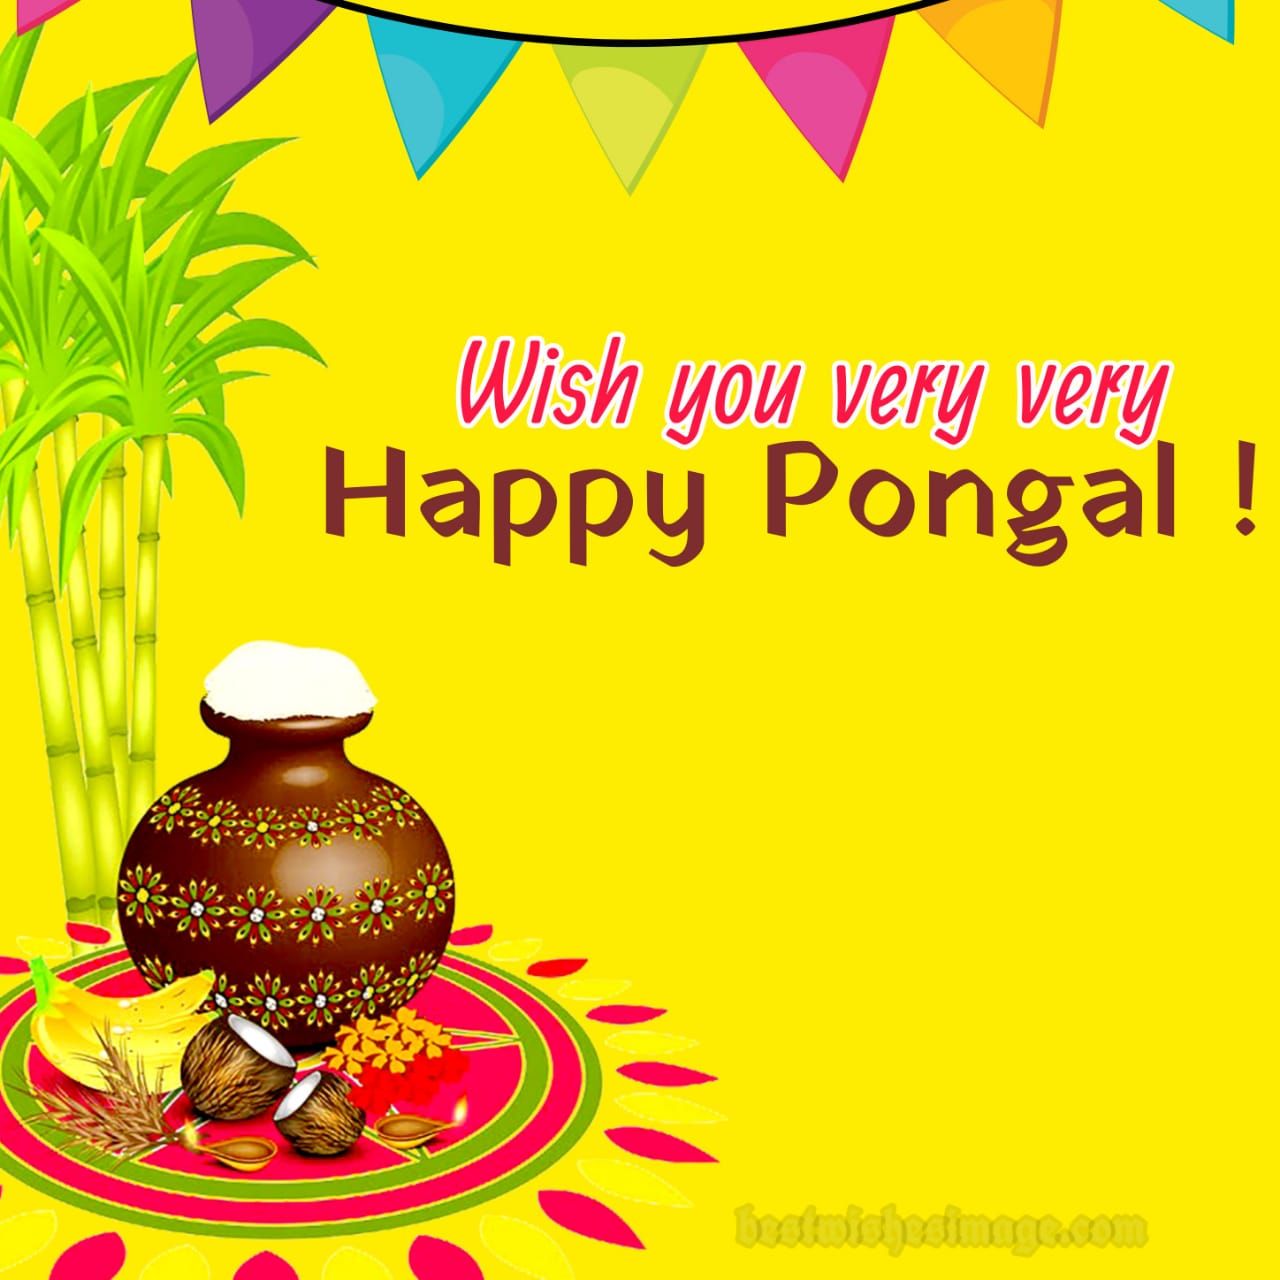 Happy Pongal image 2021, Image, Messages and quotes shared on your social media wishes image